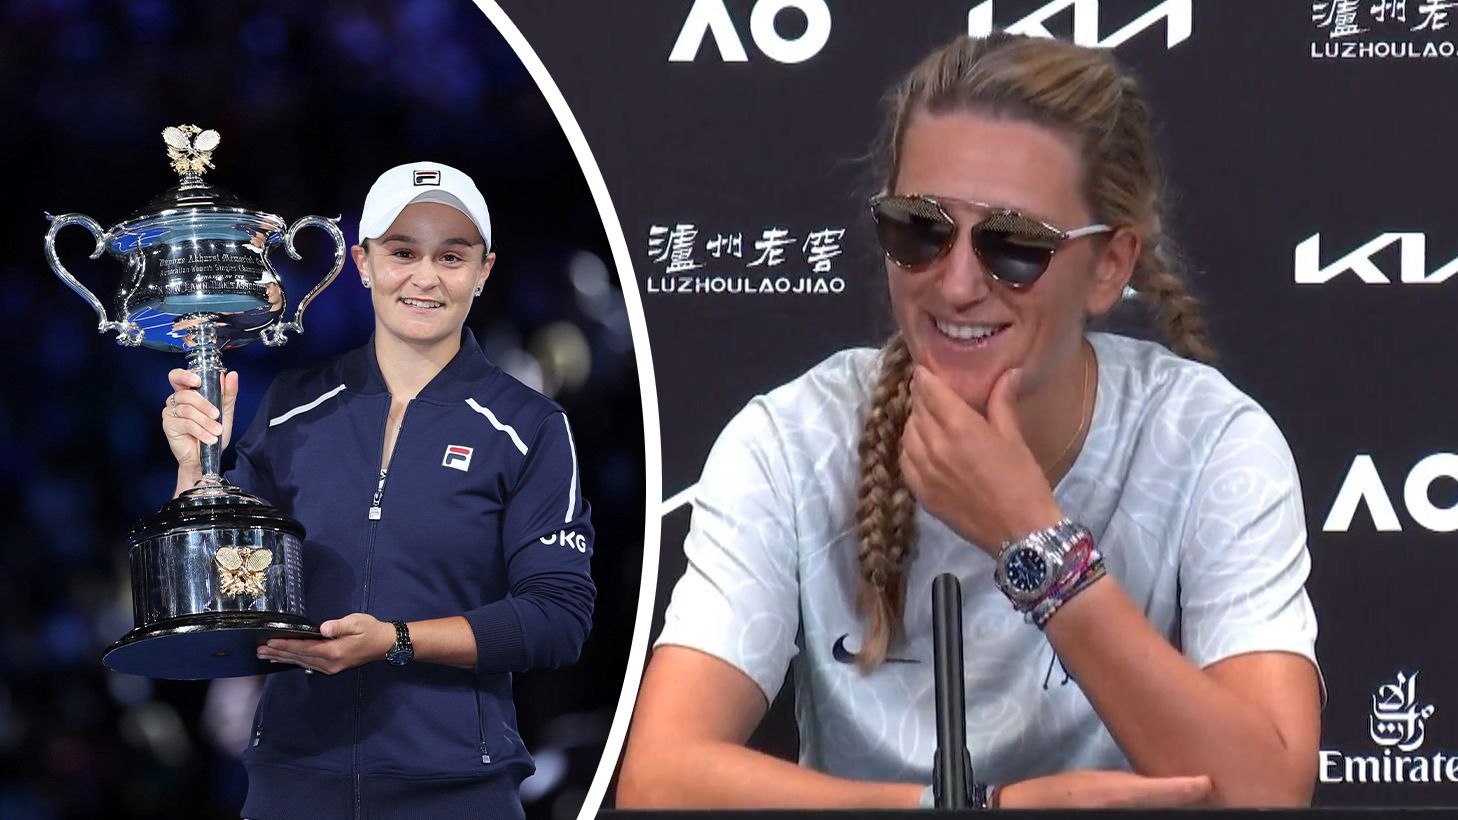 Victoria Azarenka gave a nod to Ashleigh Barty in her post match interview.